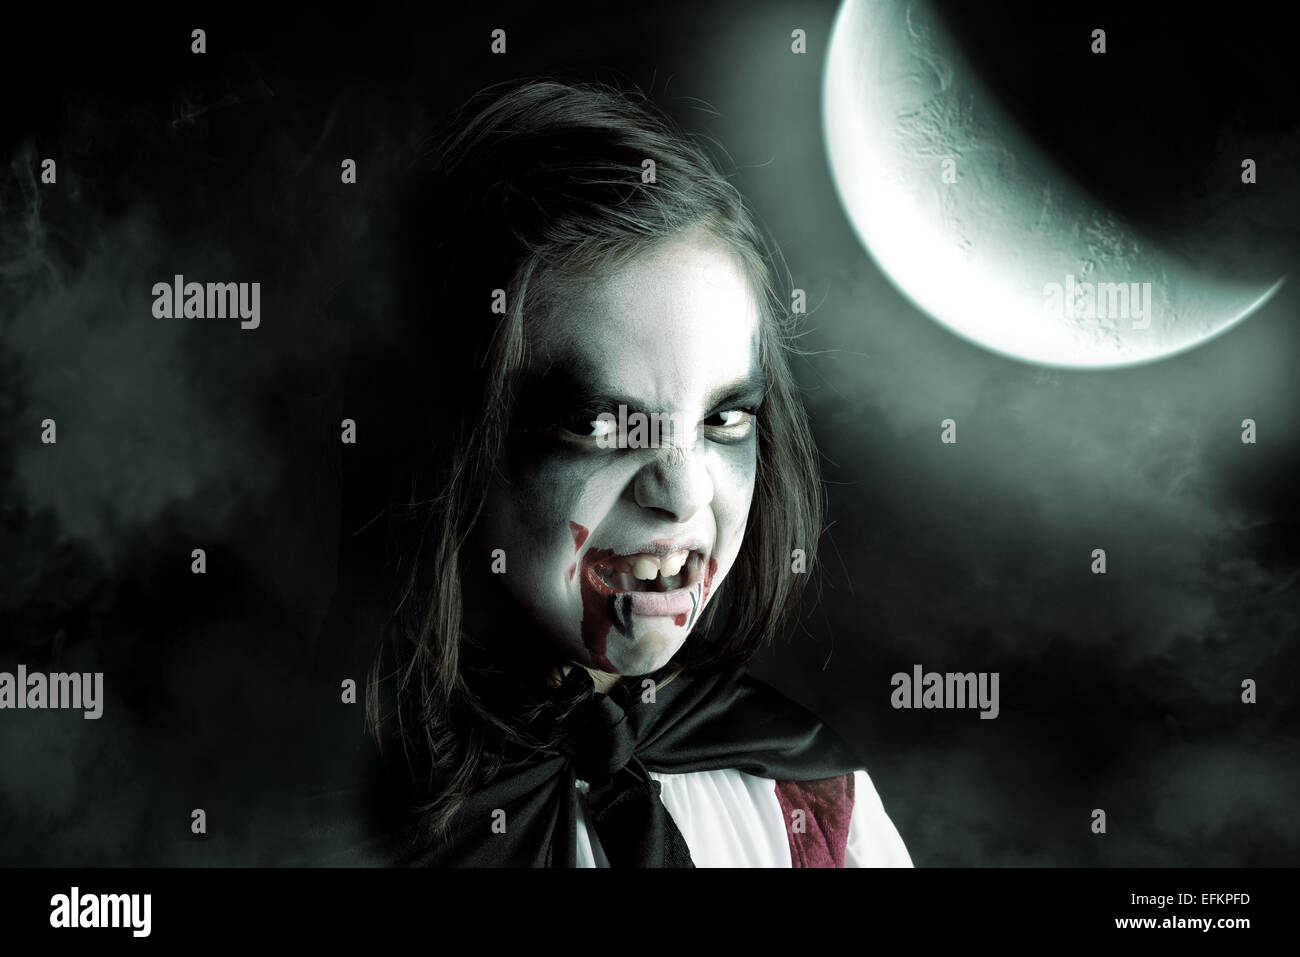 Girl with face-paint and Halloween vampire costume in a dark background with the moon Stock Photo